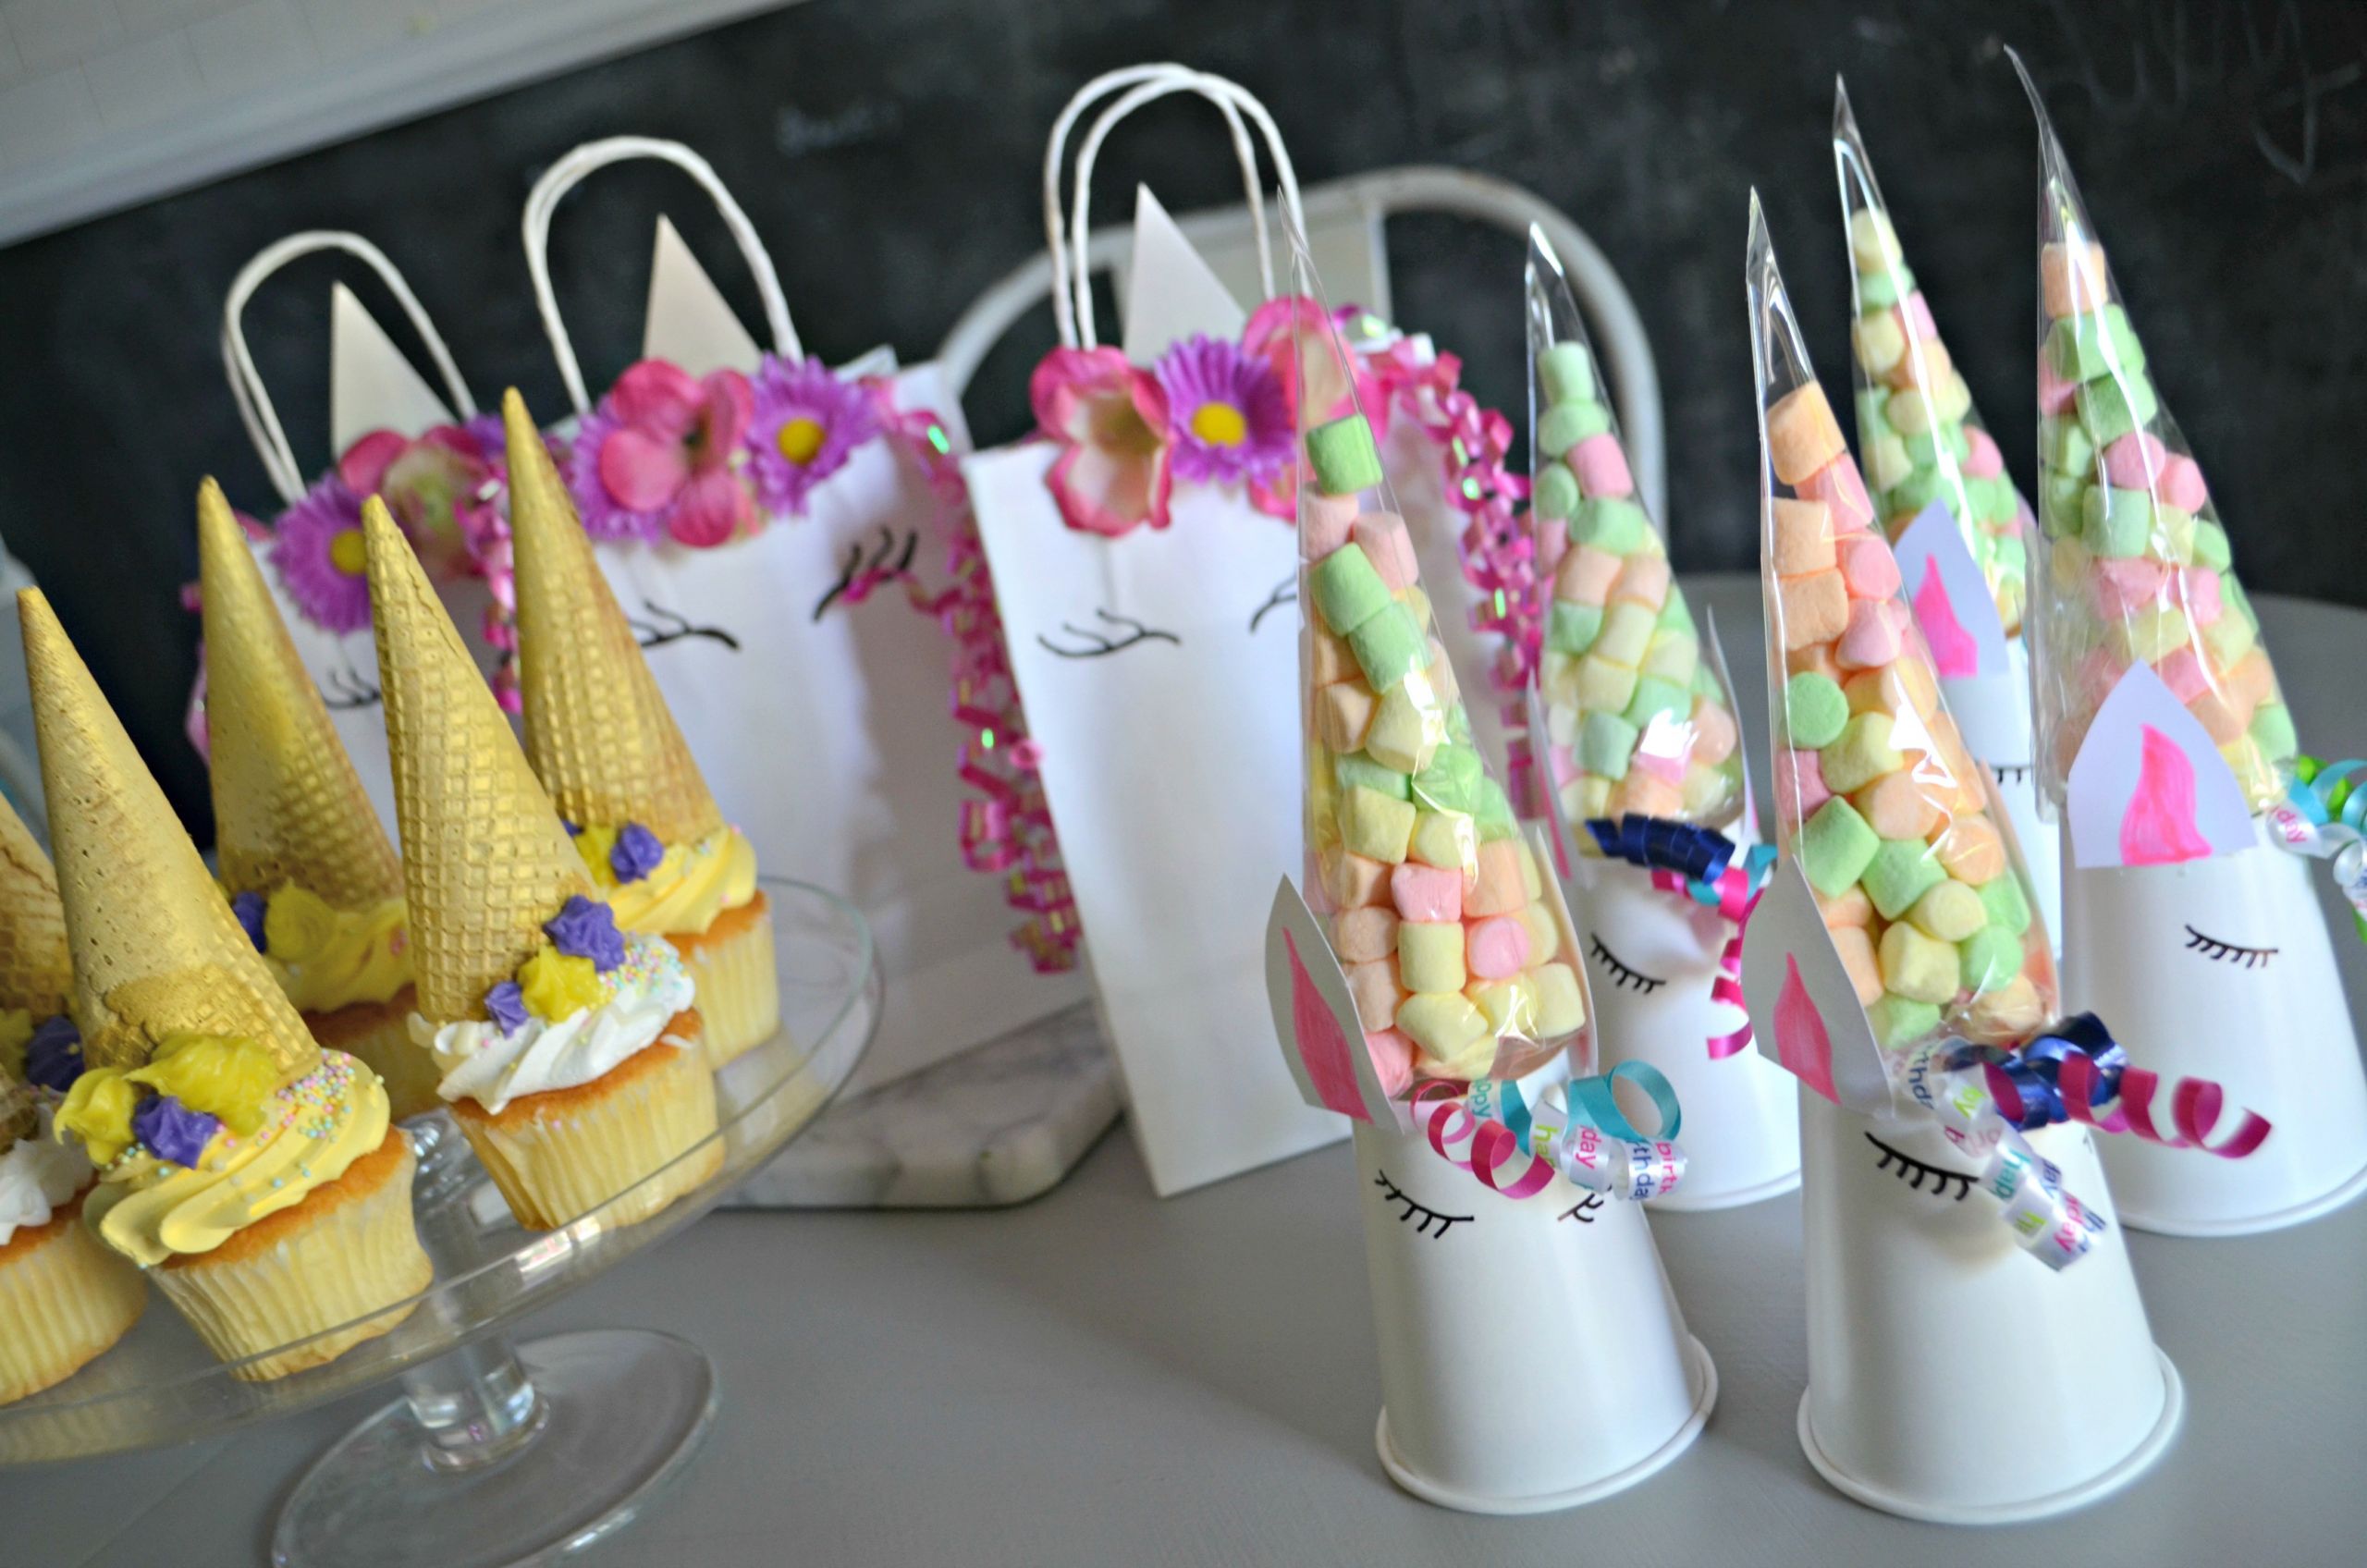 Easy DIY Party Decorations
 Make These 3 Frugal Cute and Easy DIY Unicorn Birthday